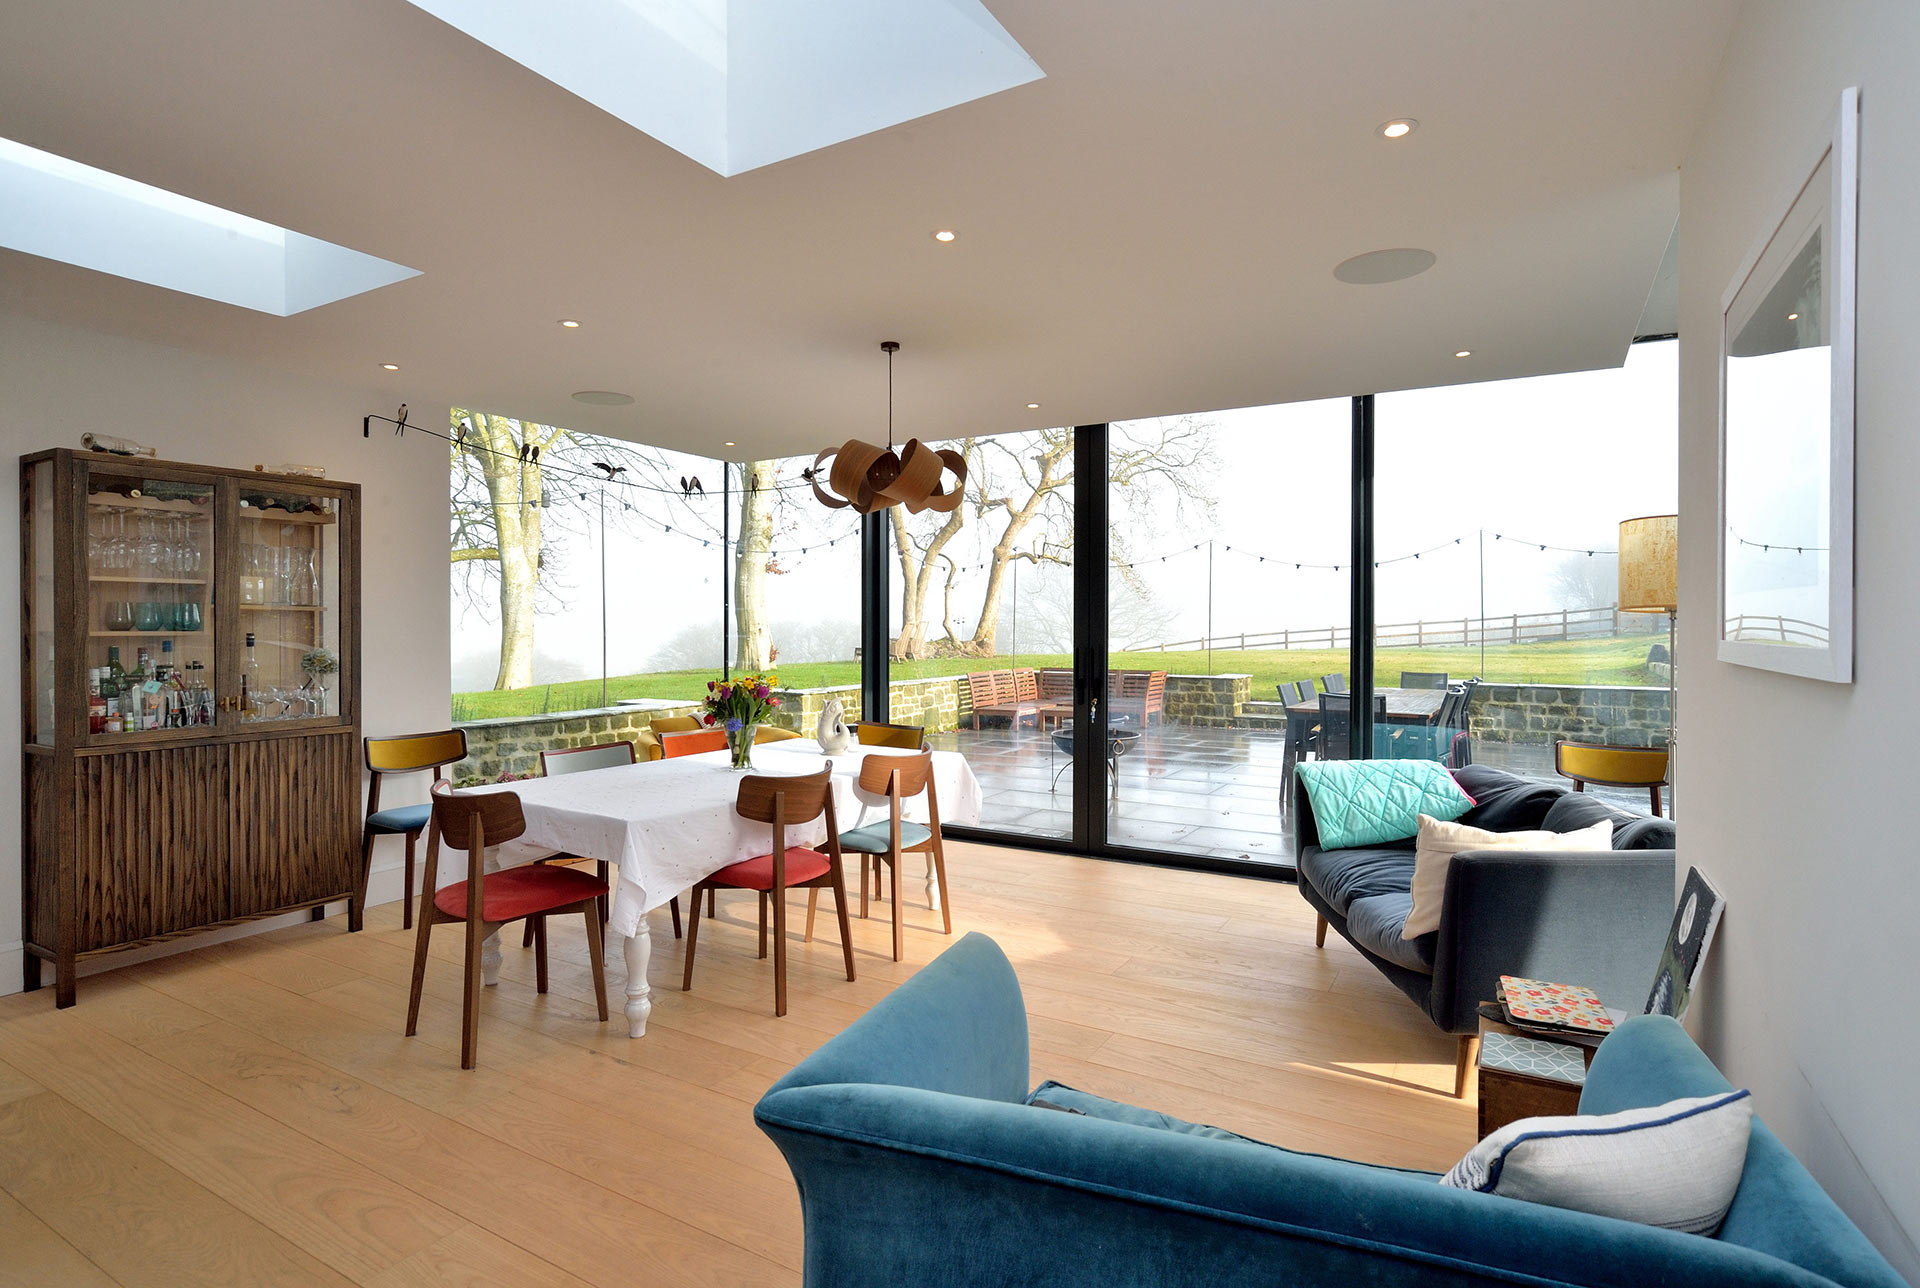 modern dining area extension looking outside to a terrace garden area